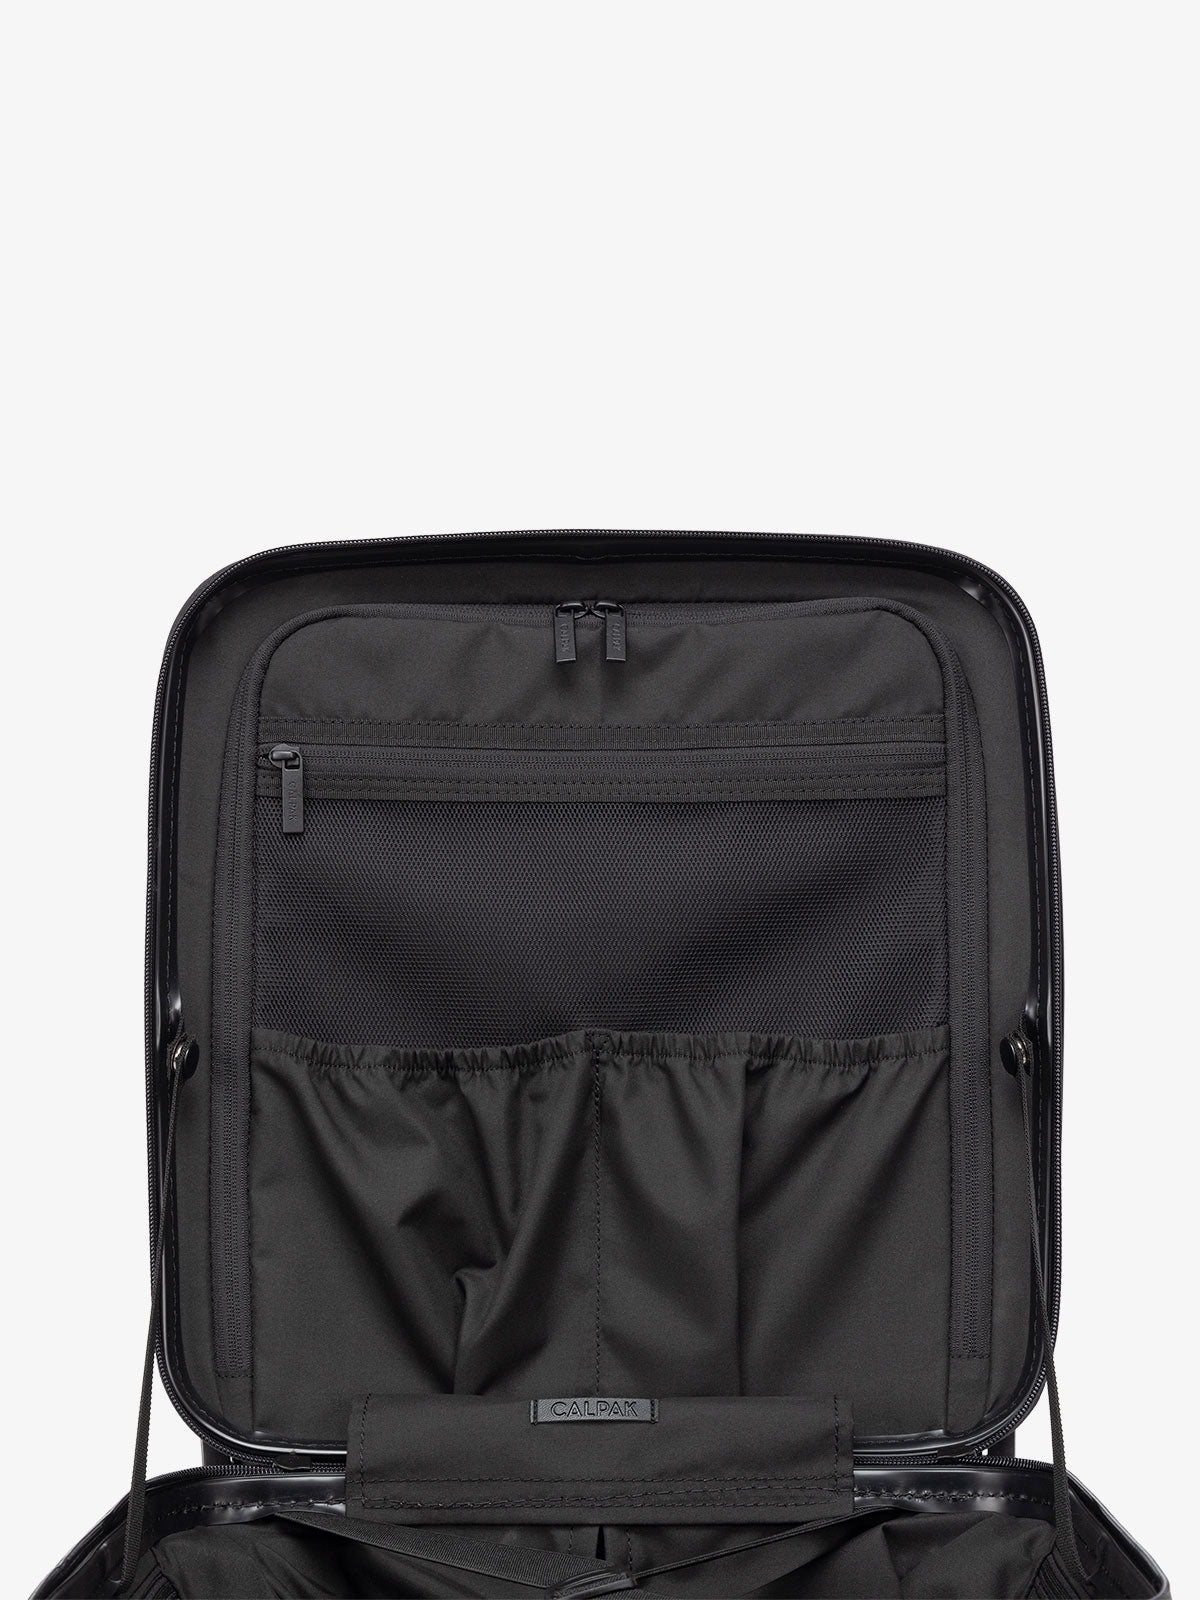 Hue mini carry on zippered divider with multiple pockets